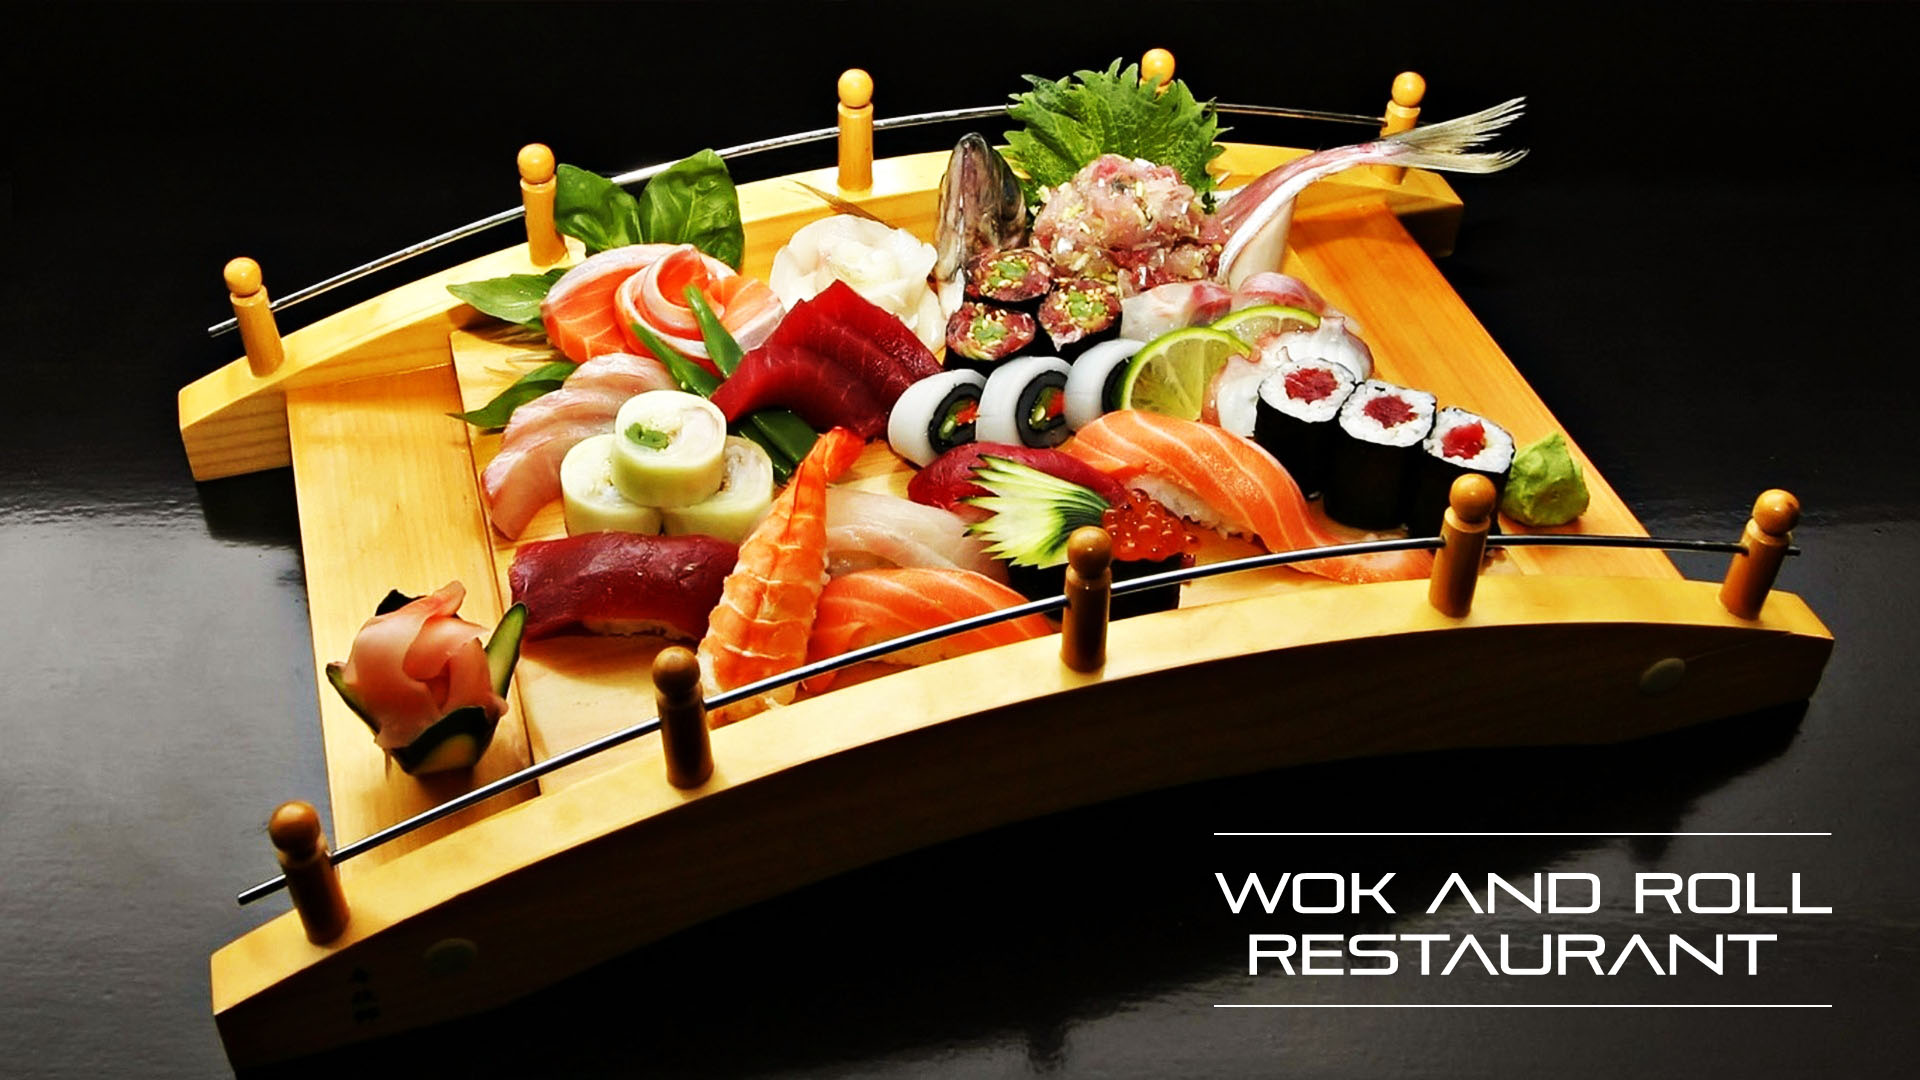 Restaurant, Serving the best of Japanese and Chinese cuisine.